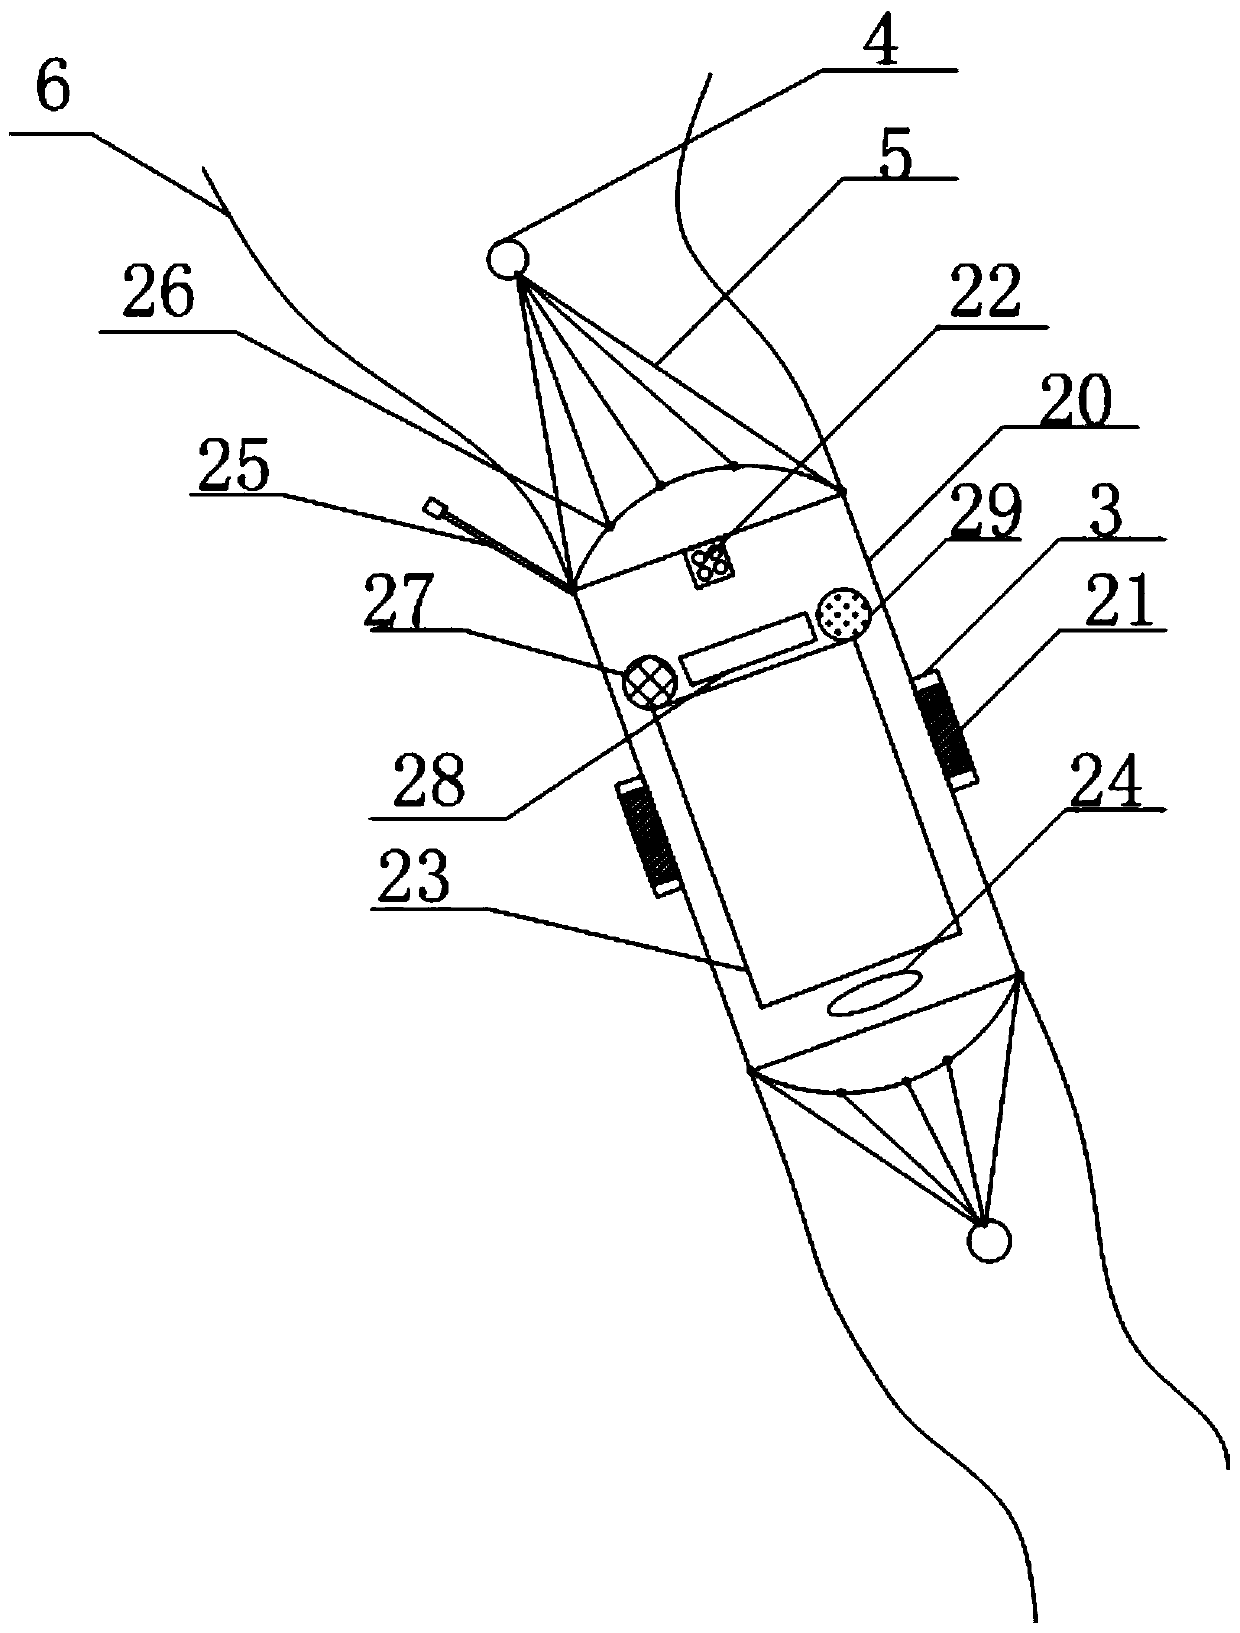 Stable wearable device suitable for electric power operator